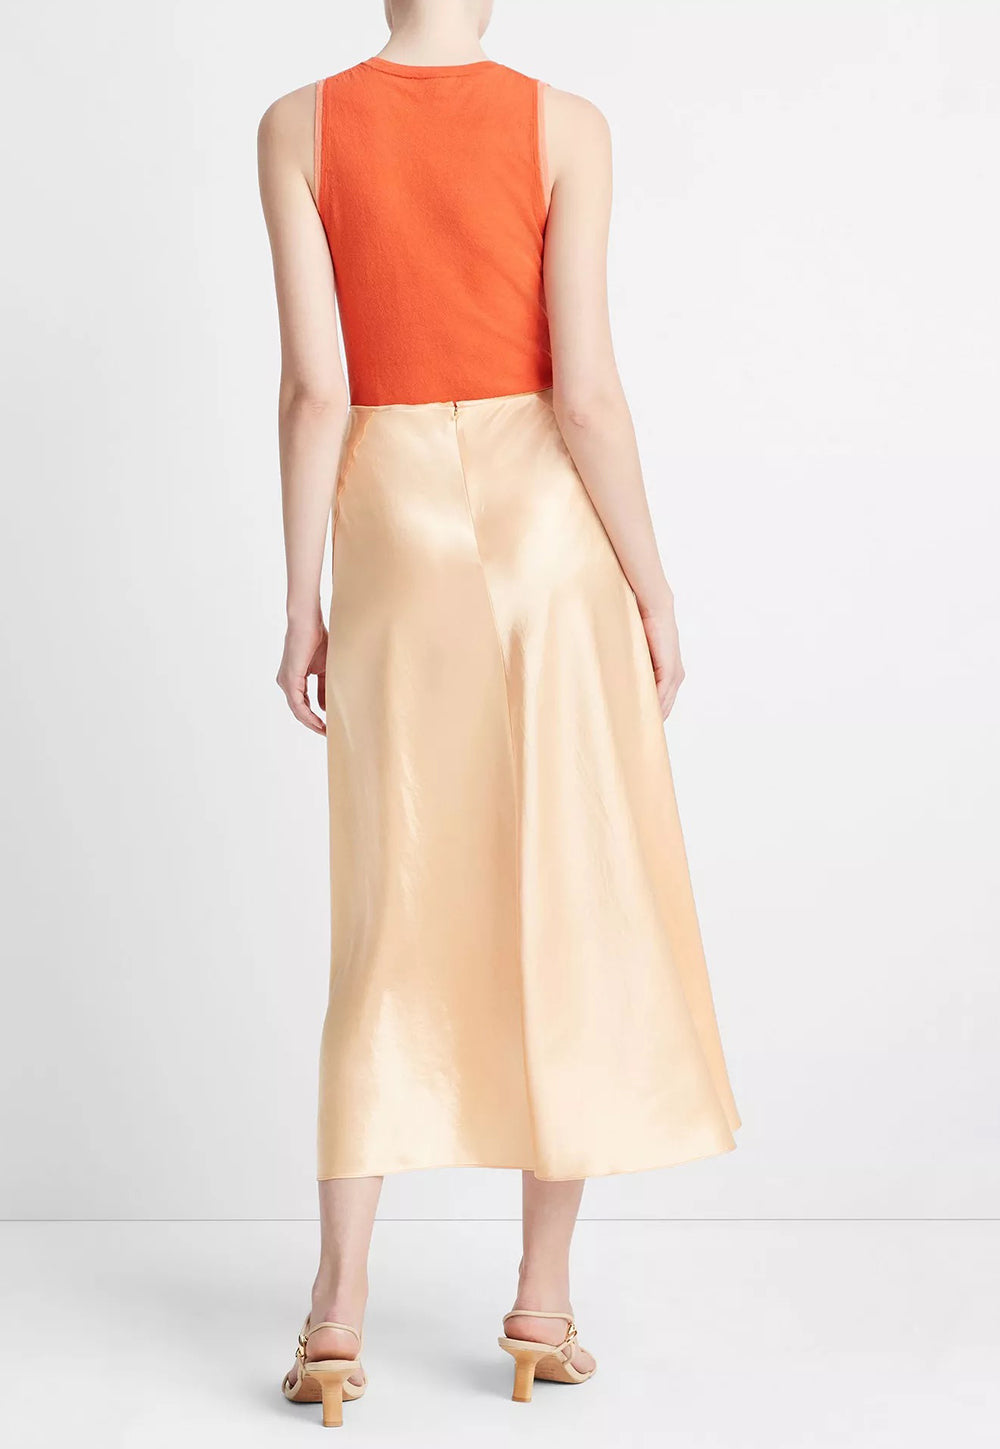 Raw Edge Panelled Slip Skirt - Cantaloupe sold by Angel Divine